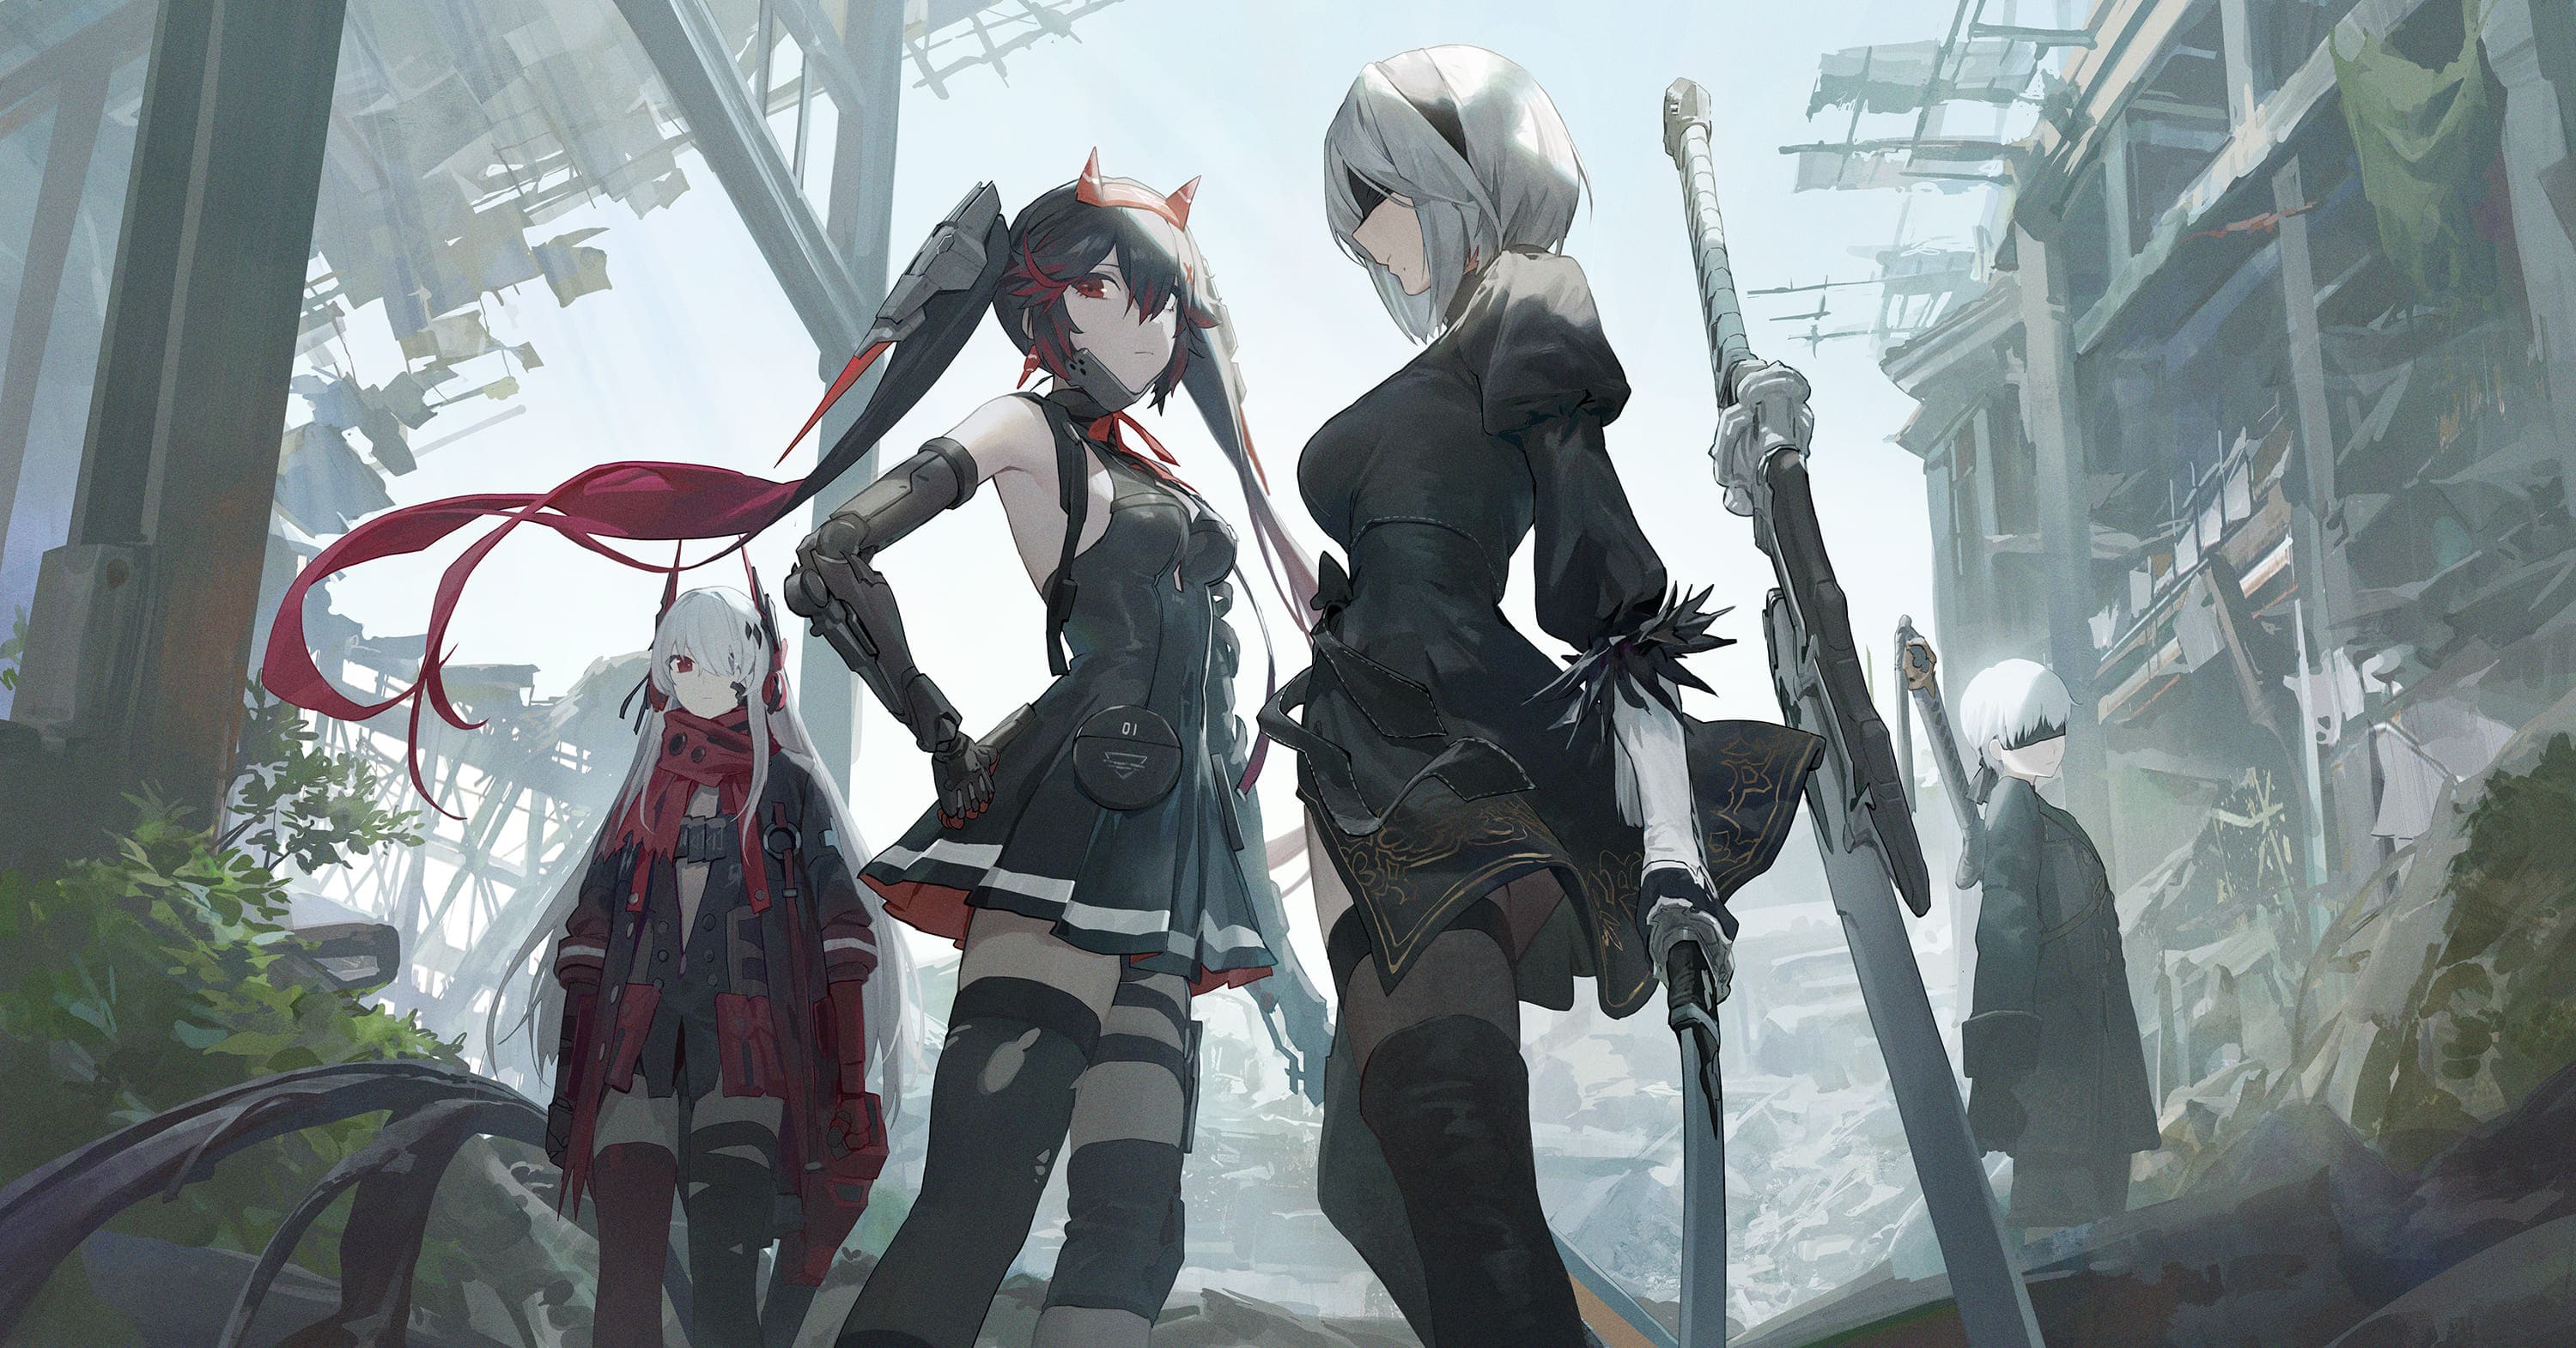 This new action-RPG feels like Nier: Automata as an even more ridiculous  sci-fi anime, and it has no right to be this fun